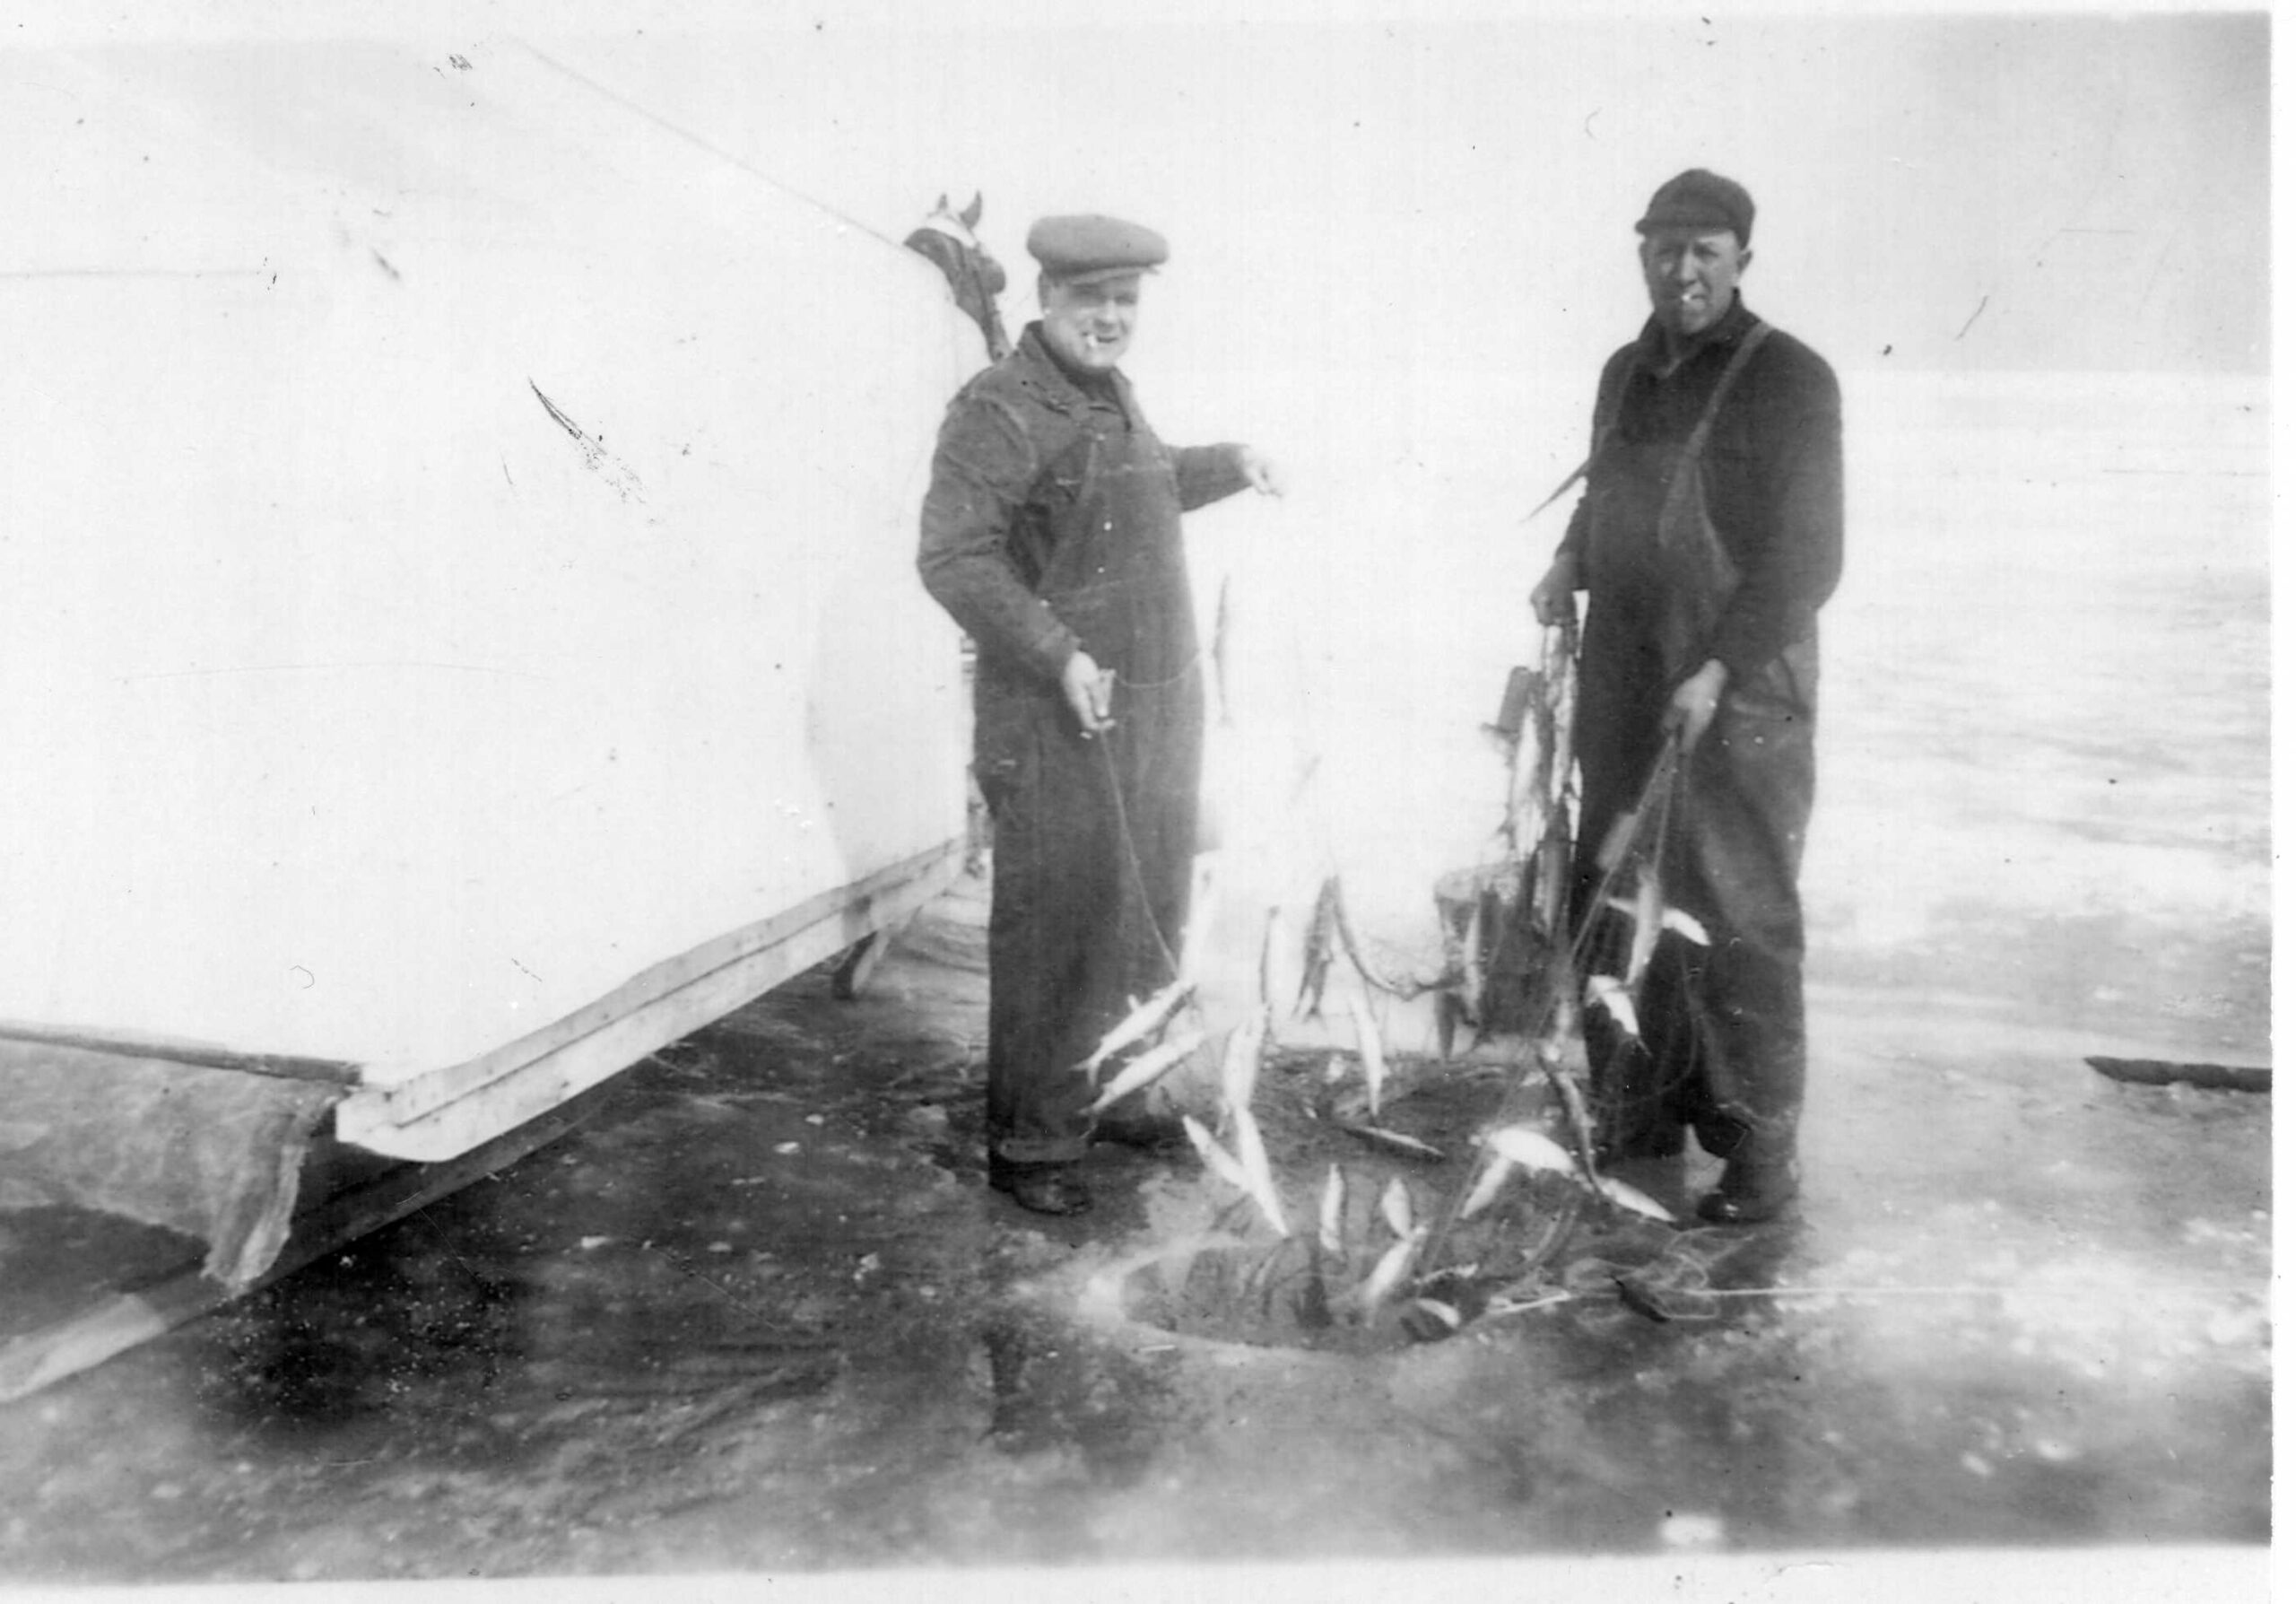 Members of the Weston family from the Bay Mills Indian Community ice fishing at the mouth of the St. Mary’s River in Michigan, in the 1930s.